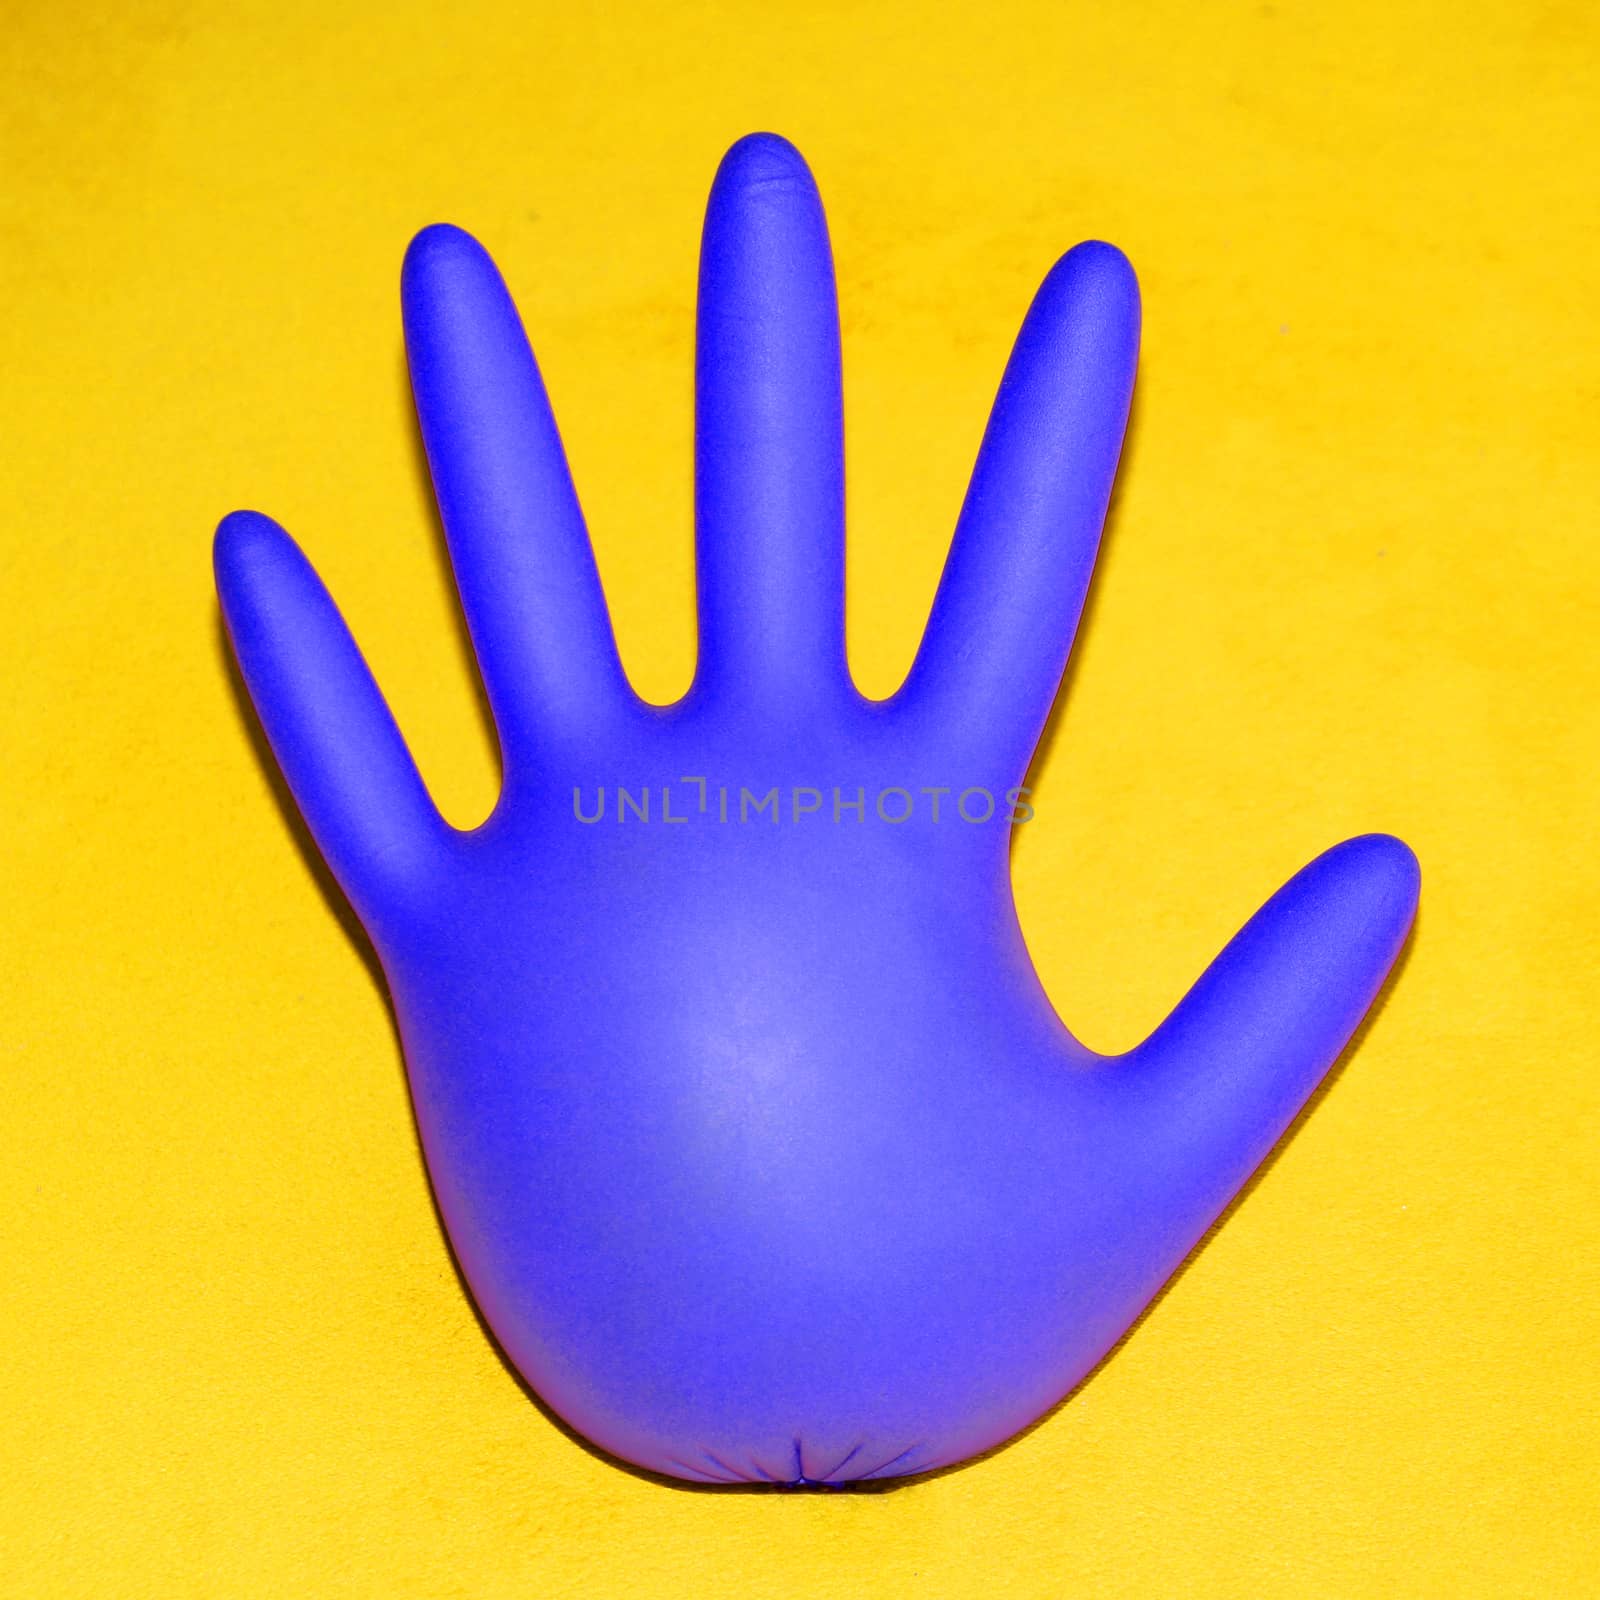 inflated rubber medical glove on yellow background, square photo by Annado